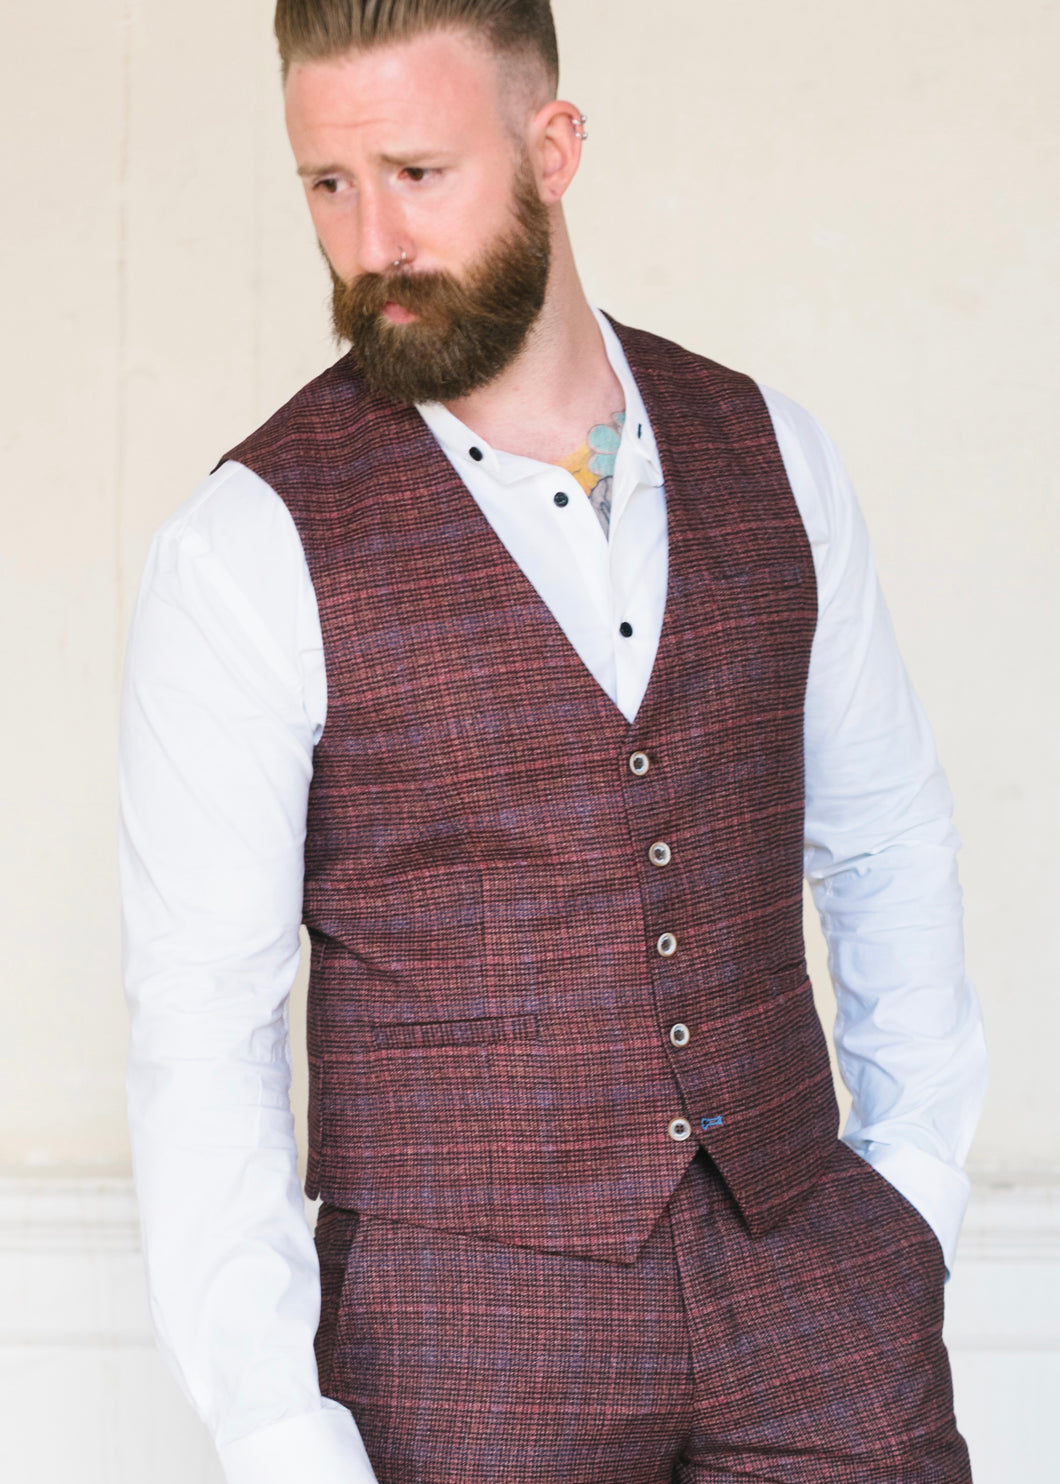 Cavani Carly Wine Tweed Waistcoat worn with a Suave Owl white shirt and matching wine tweed trousers